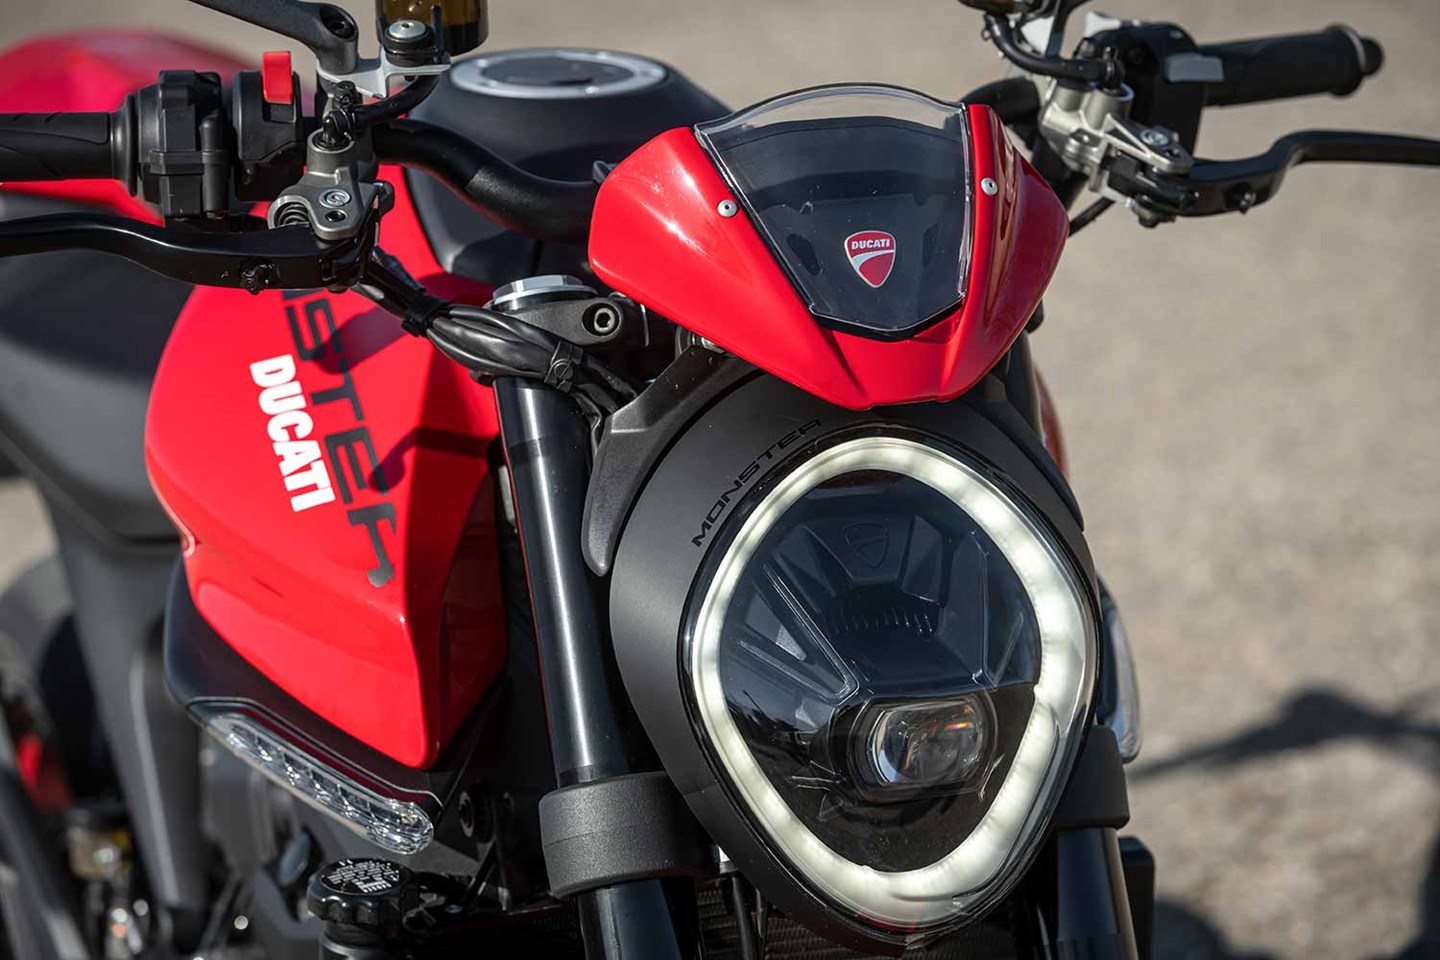 Ducati Revolution Monster: all about the new model of 2021